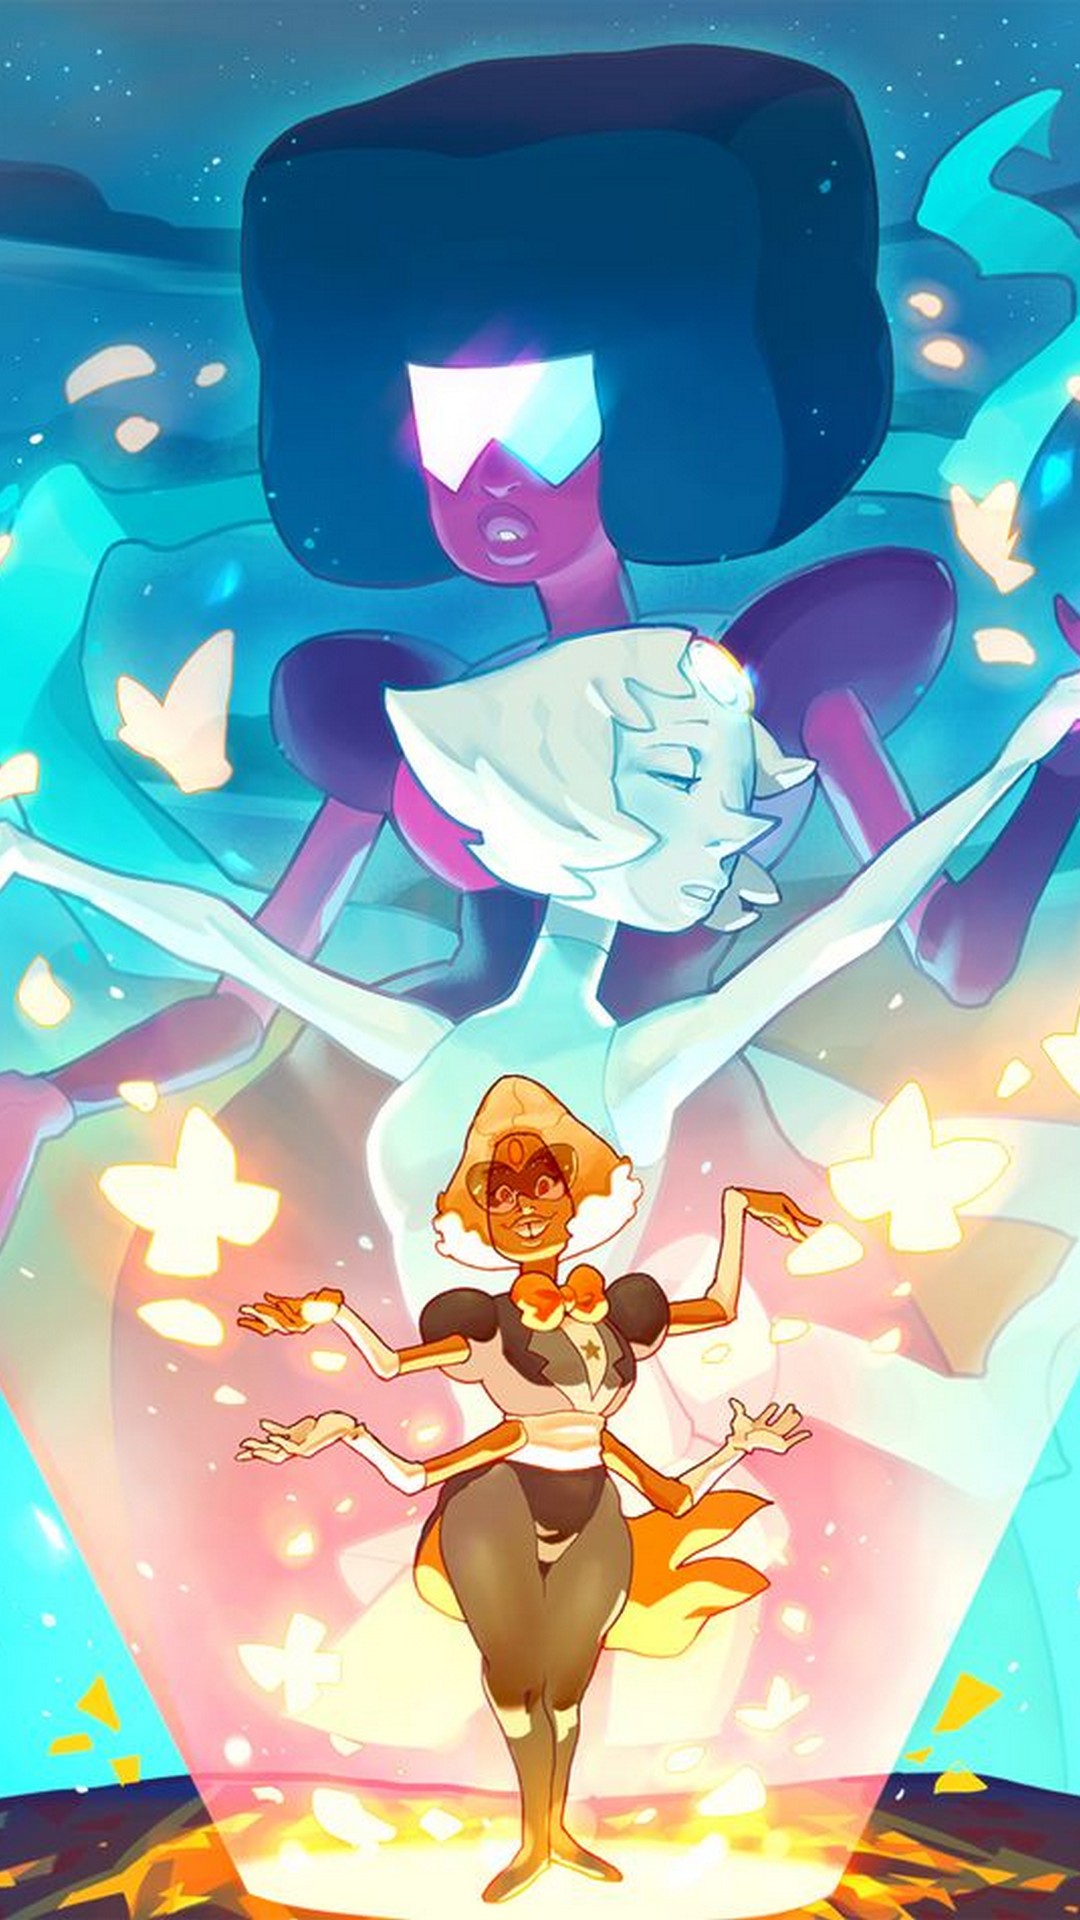 Phones Wallpaper Steven Universe with high-resolution 1080x1920 pixel. Download all Mobile Wallpapers and Use them as wallpapers for your iPhone, Tablet, iPad, Android and other mobile devices